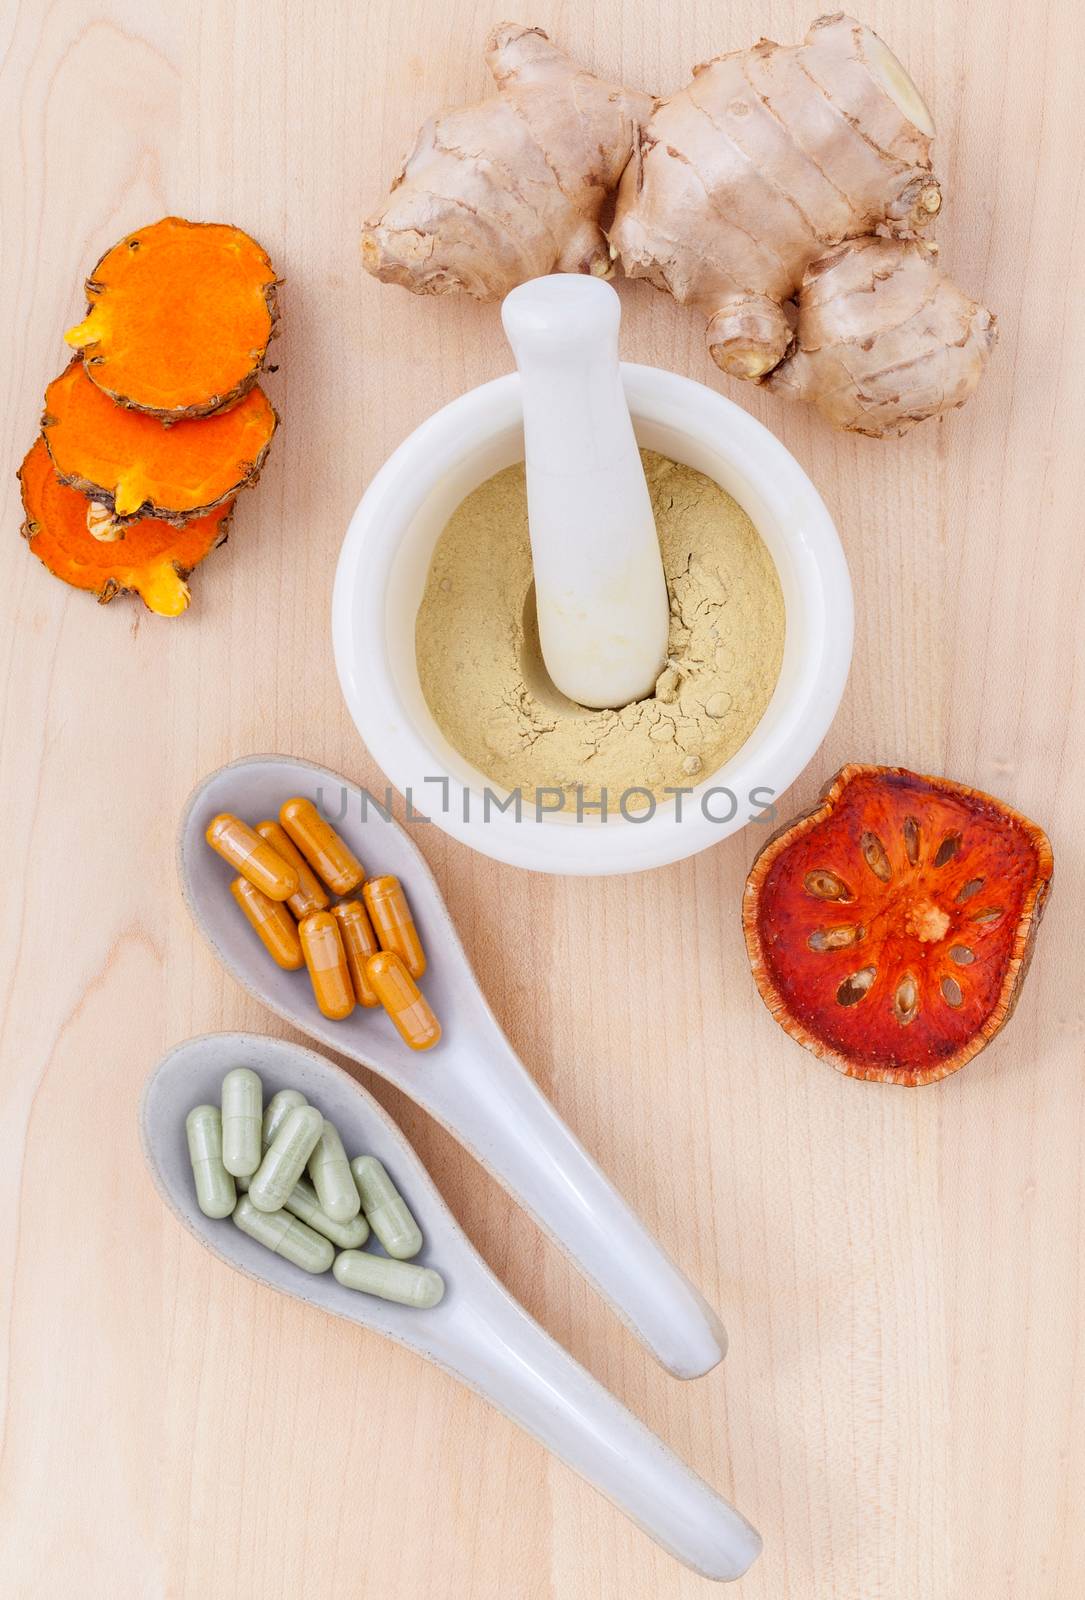 Alternative health care fresh herbal  ,dry and herbal capsule with mortar on wooden background.